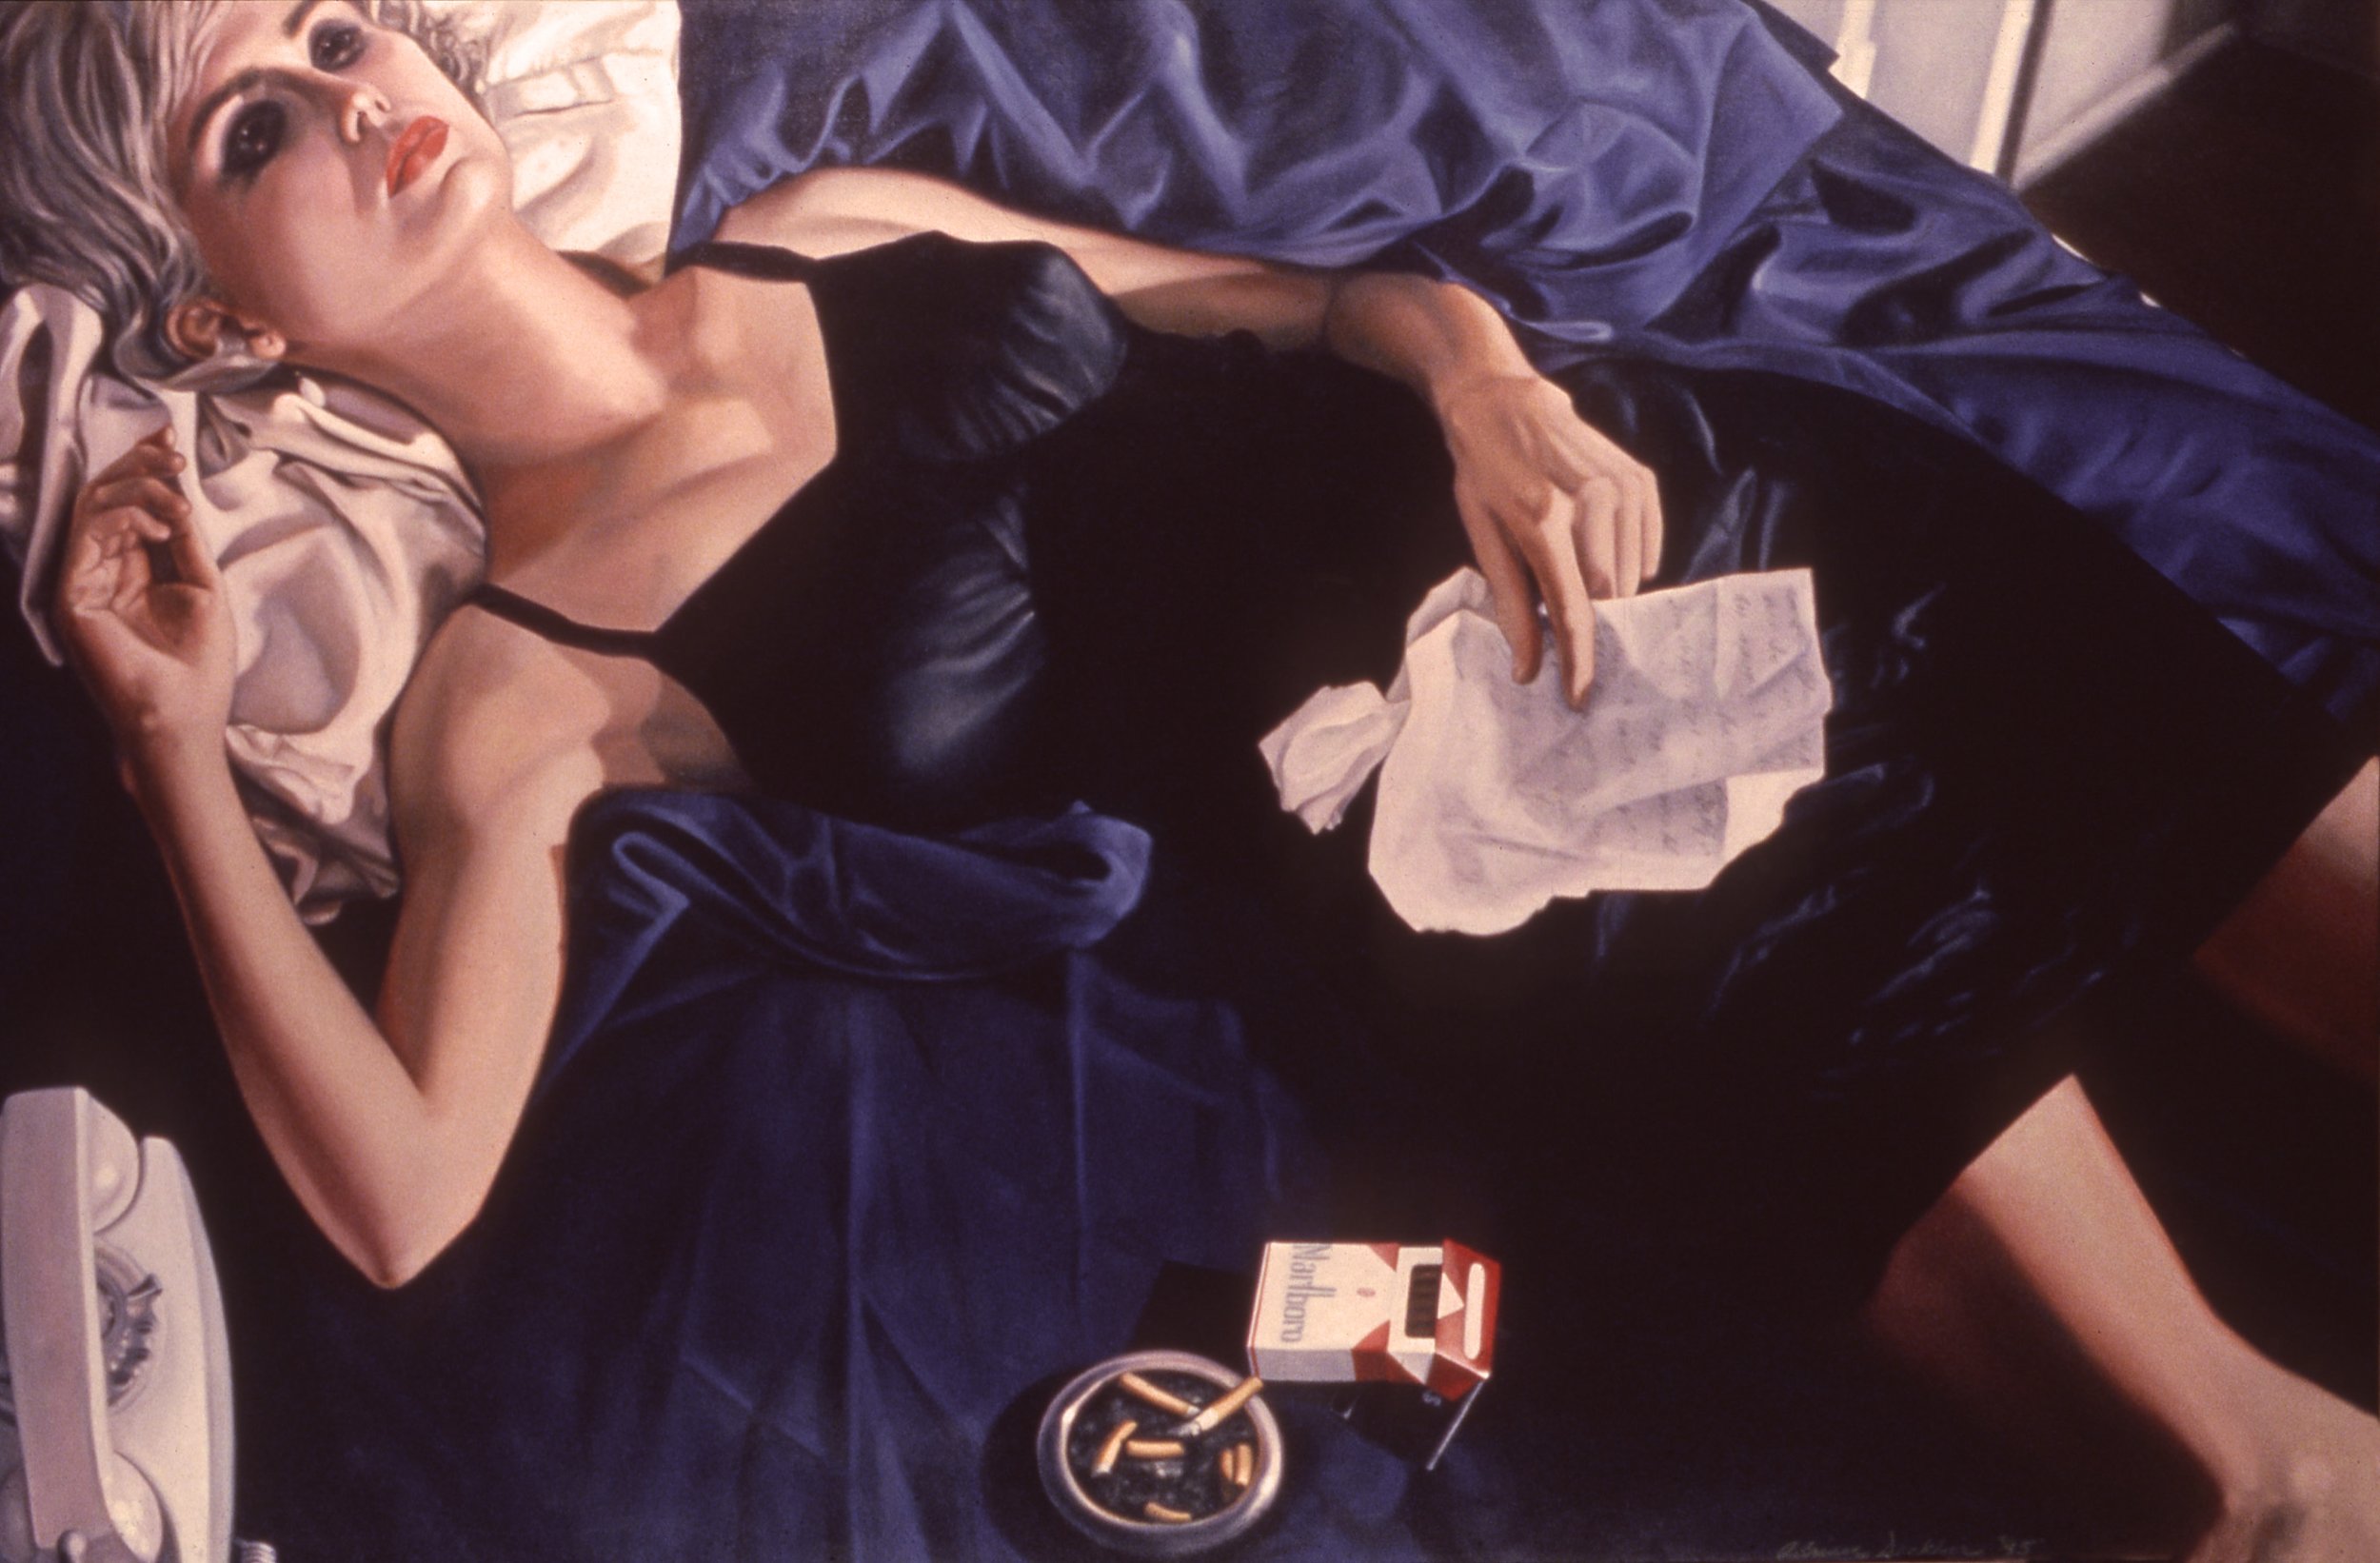    Scene III - The Letter  , 66” x 102”, oil on canvas 